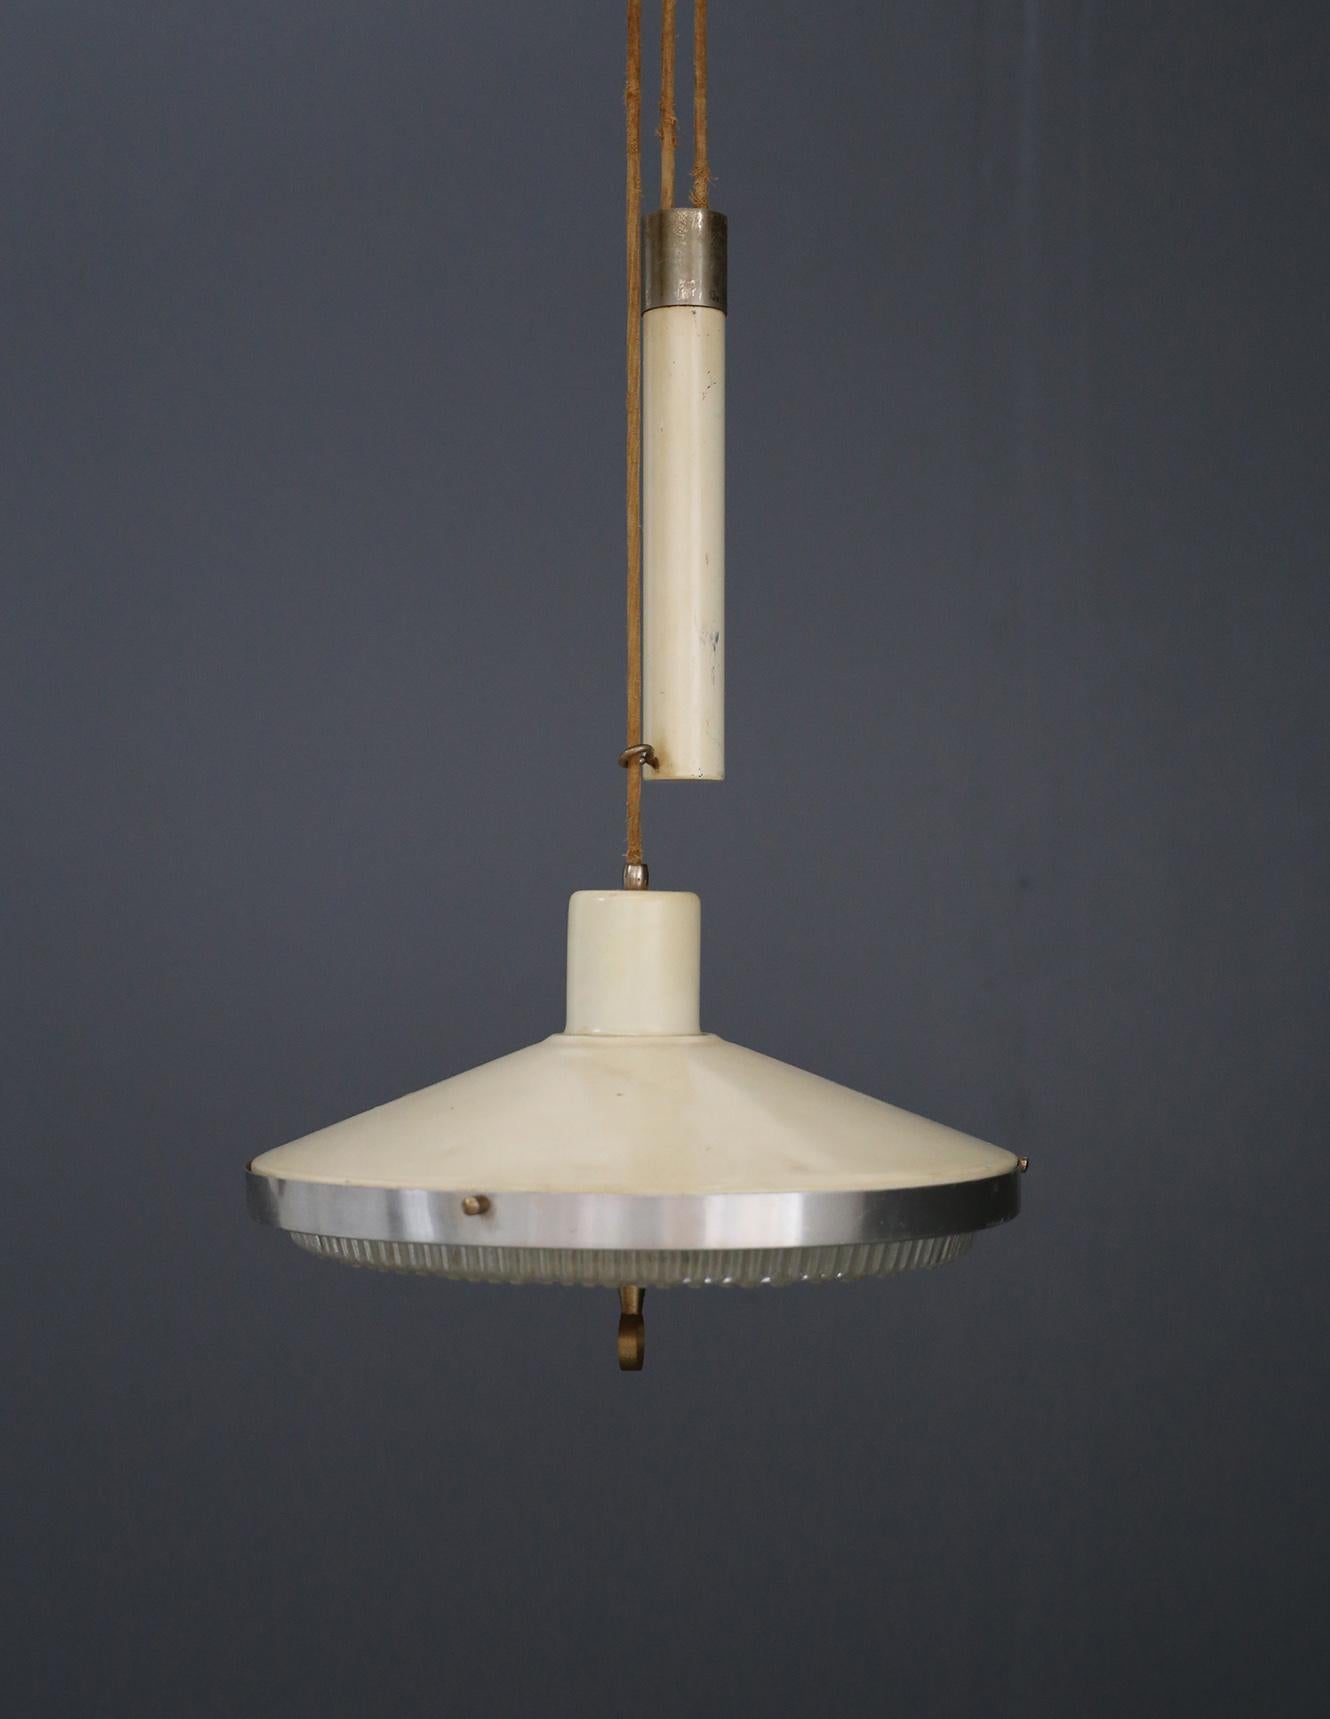 Eccentric vintage design ups and downs from the 1950s. The pendant also called ups and downs because of its counterweight mechanism that allows the lamp to go up and down at will. The pendant comes from Italian administrative offices.
The